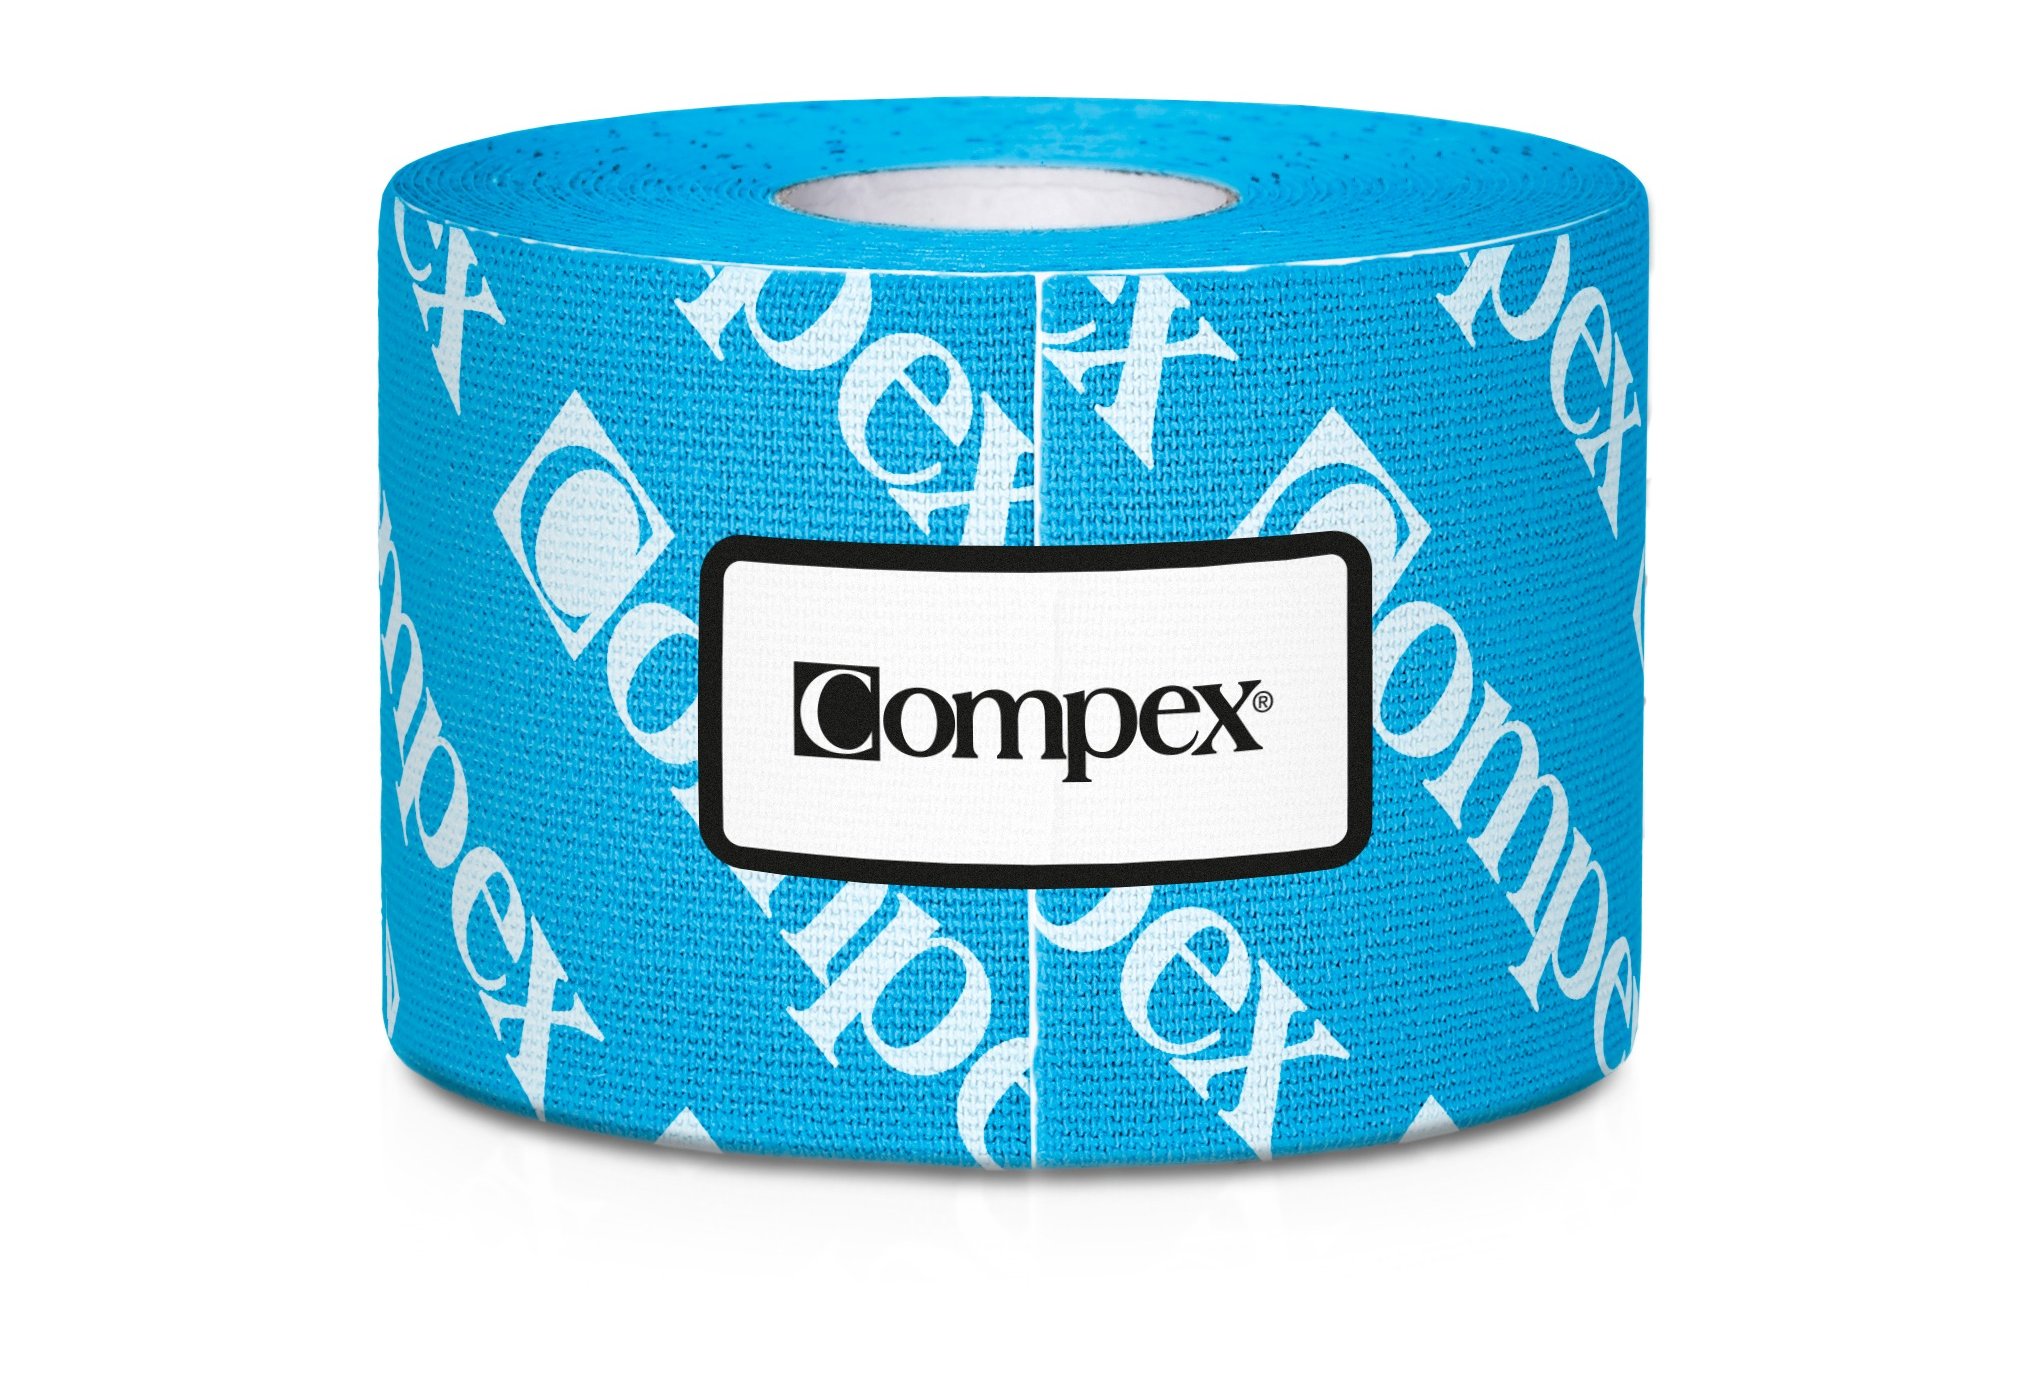 Compex Tape Protection musculaire & articulaire